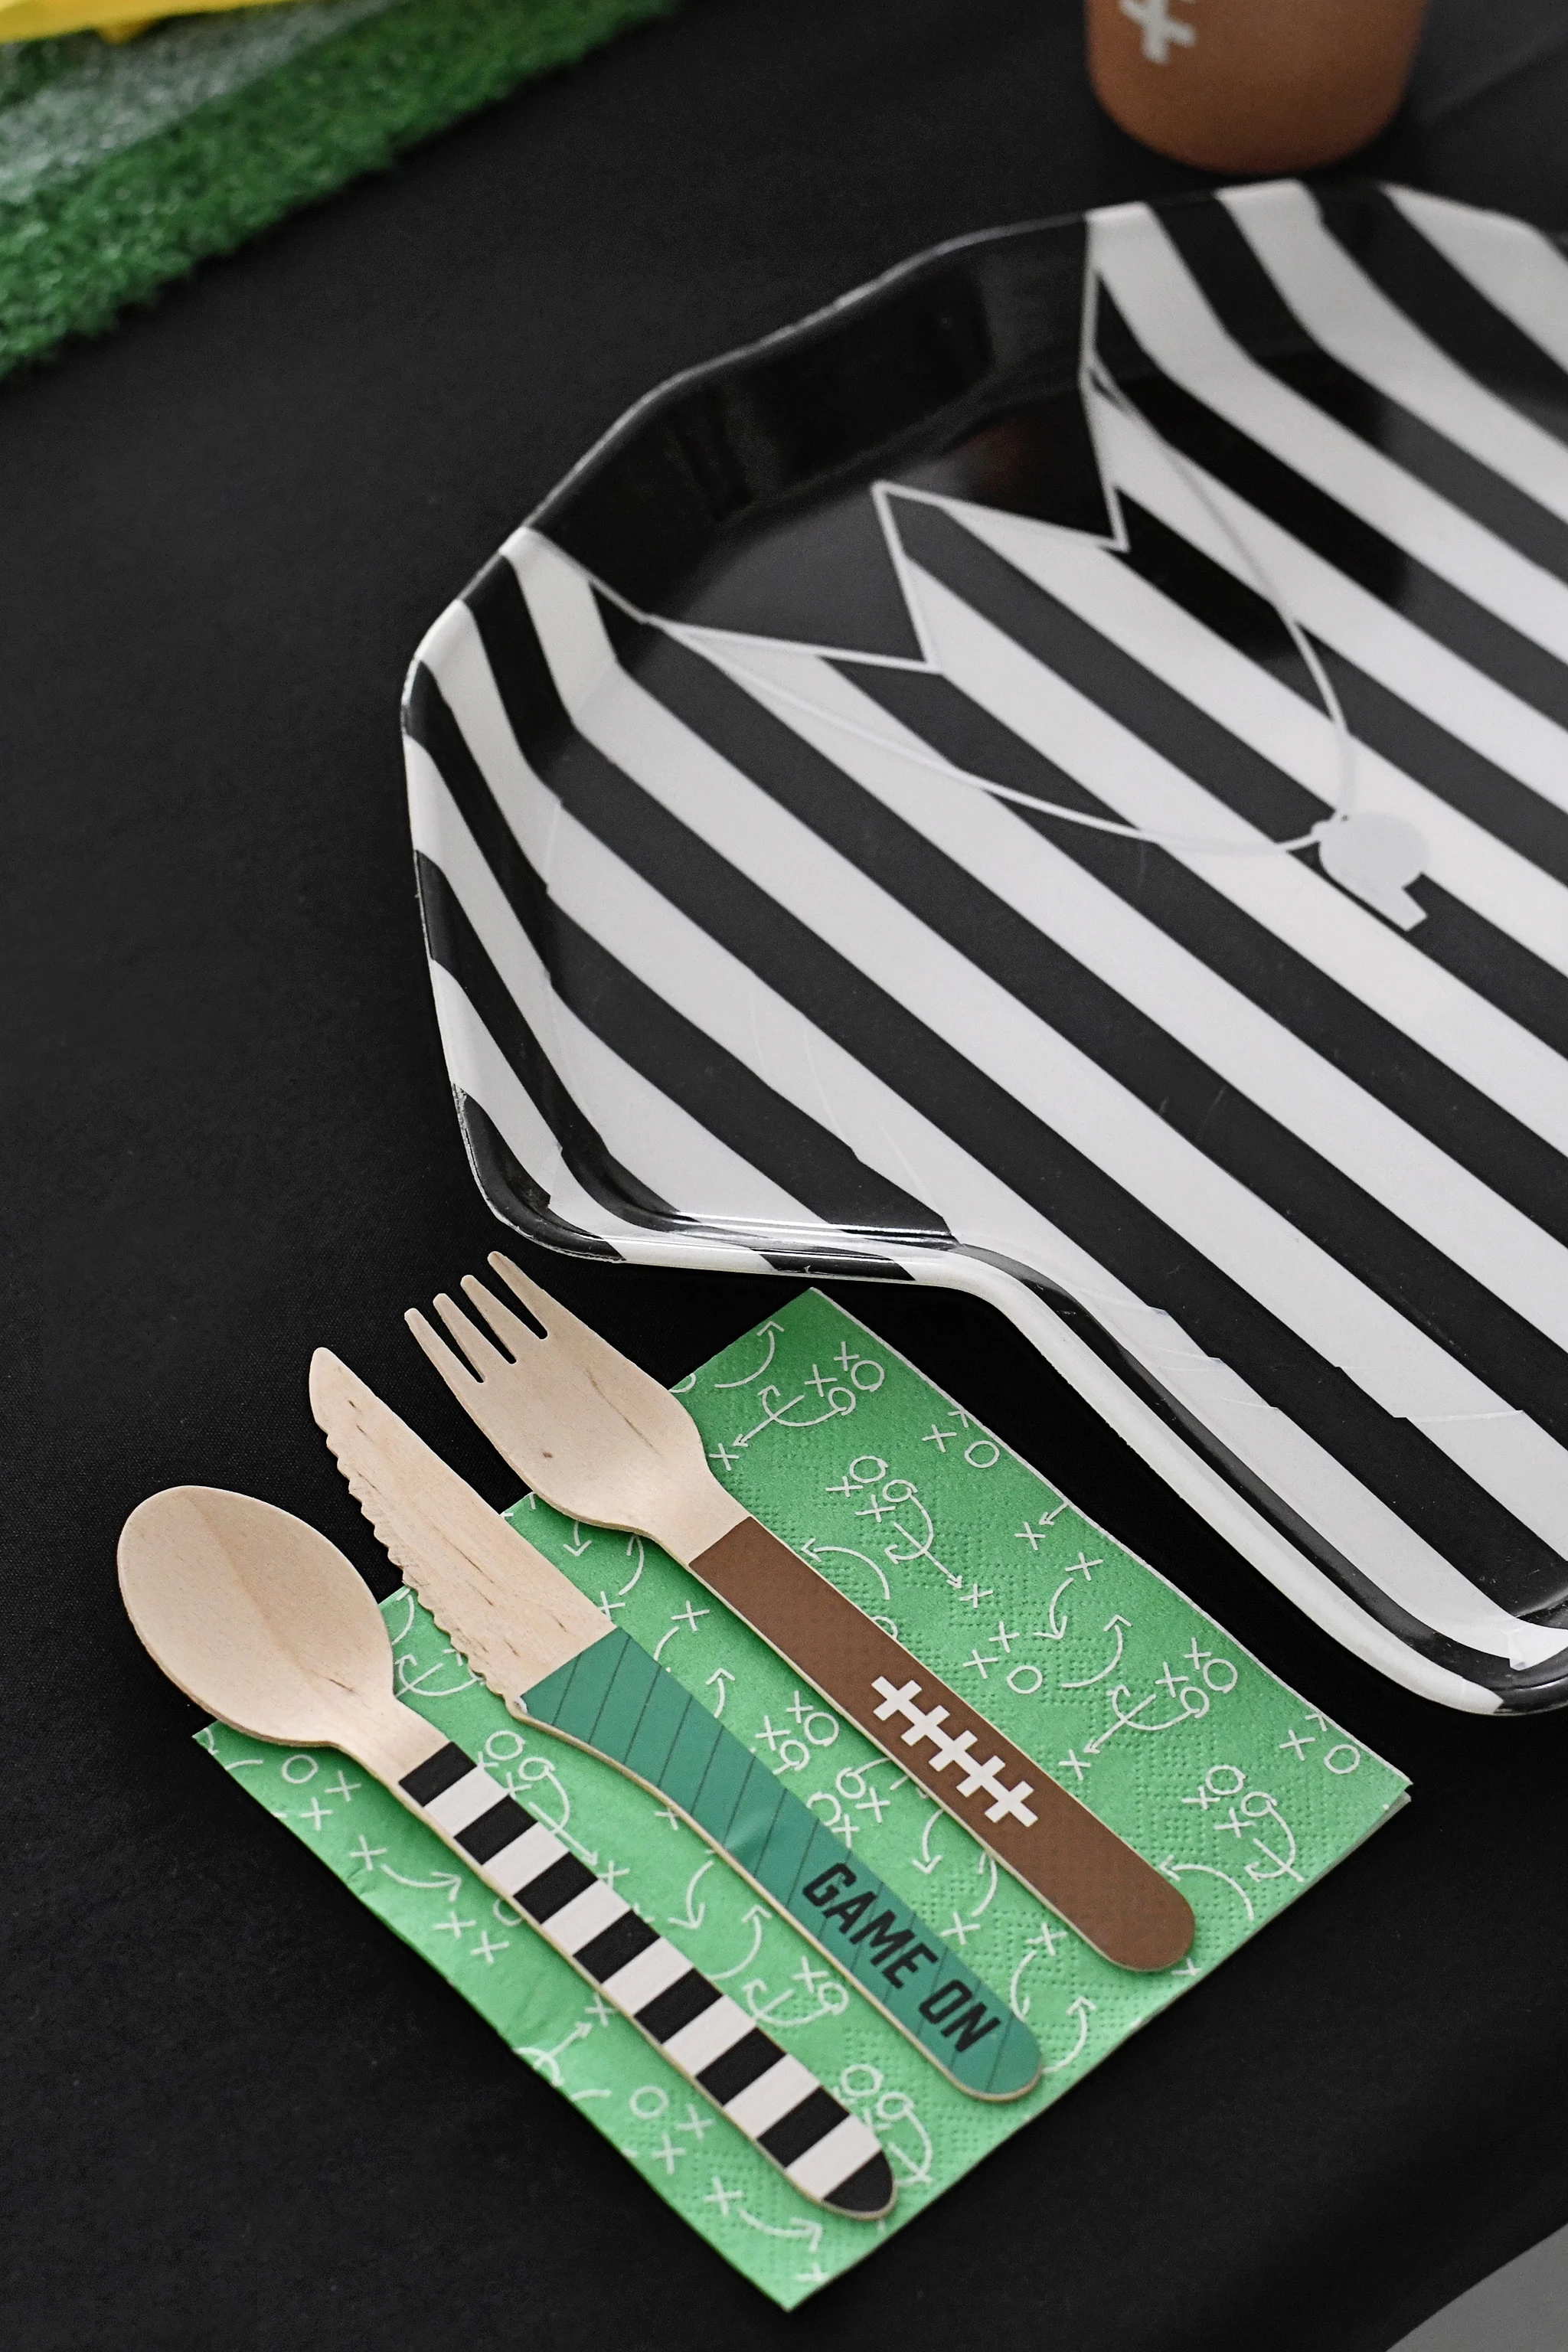 Football-themed place settings